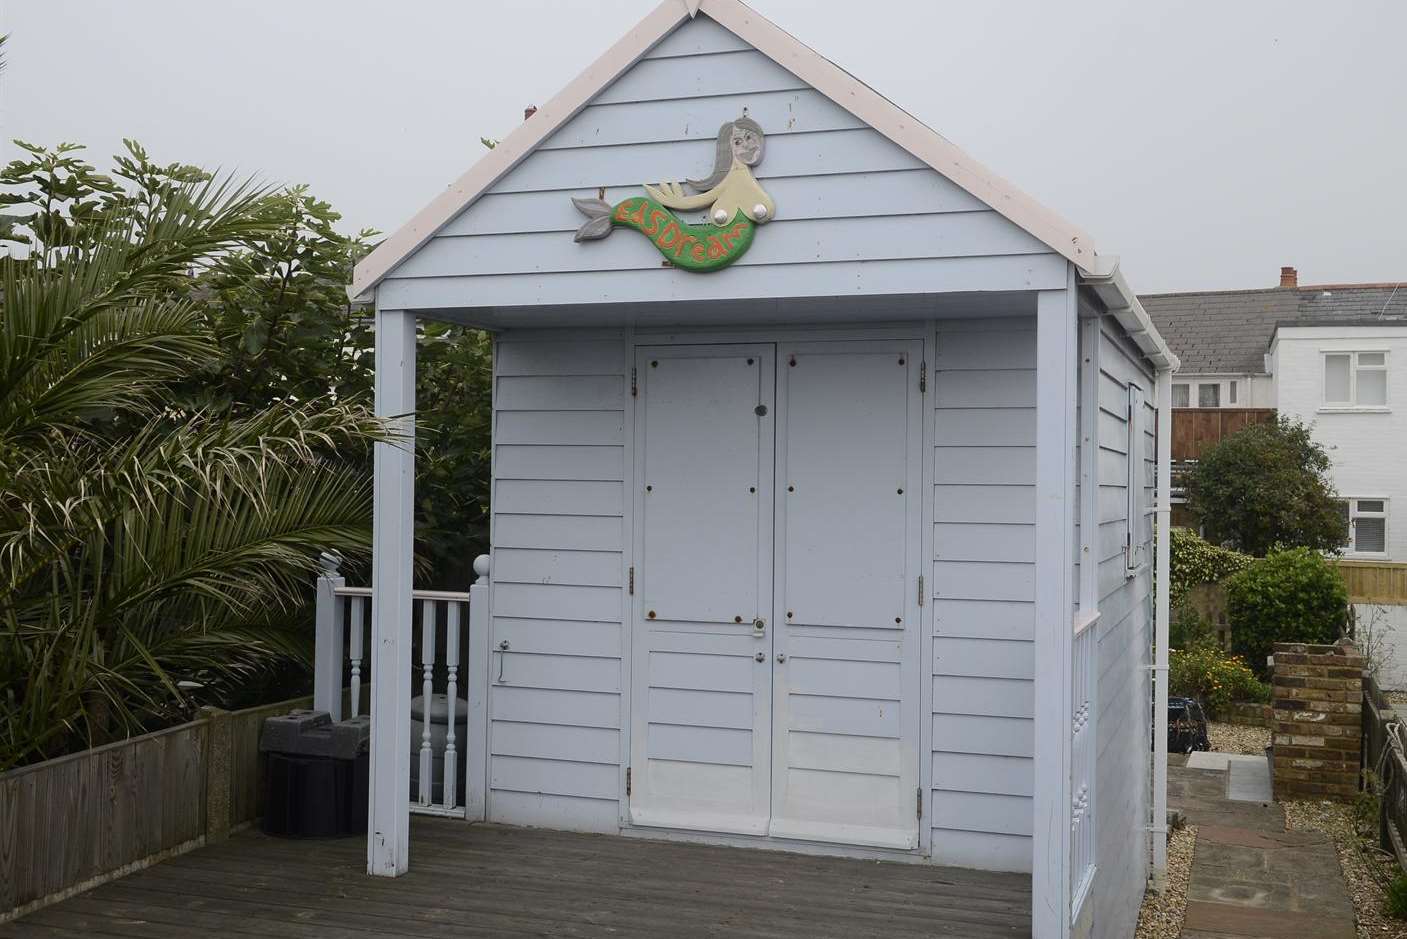 The £120,000 beach hut off Island Wall in Whitstable